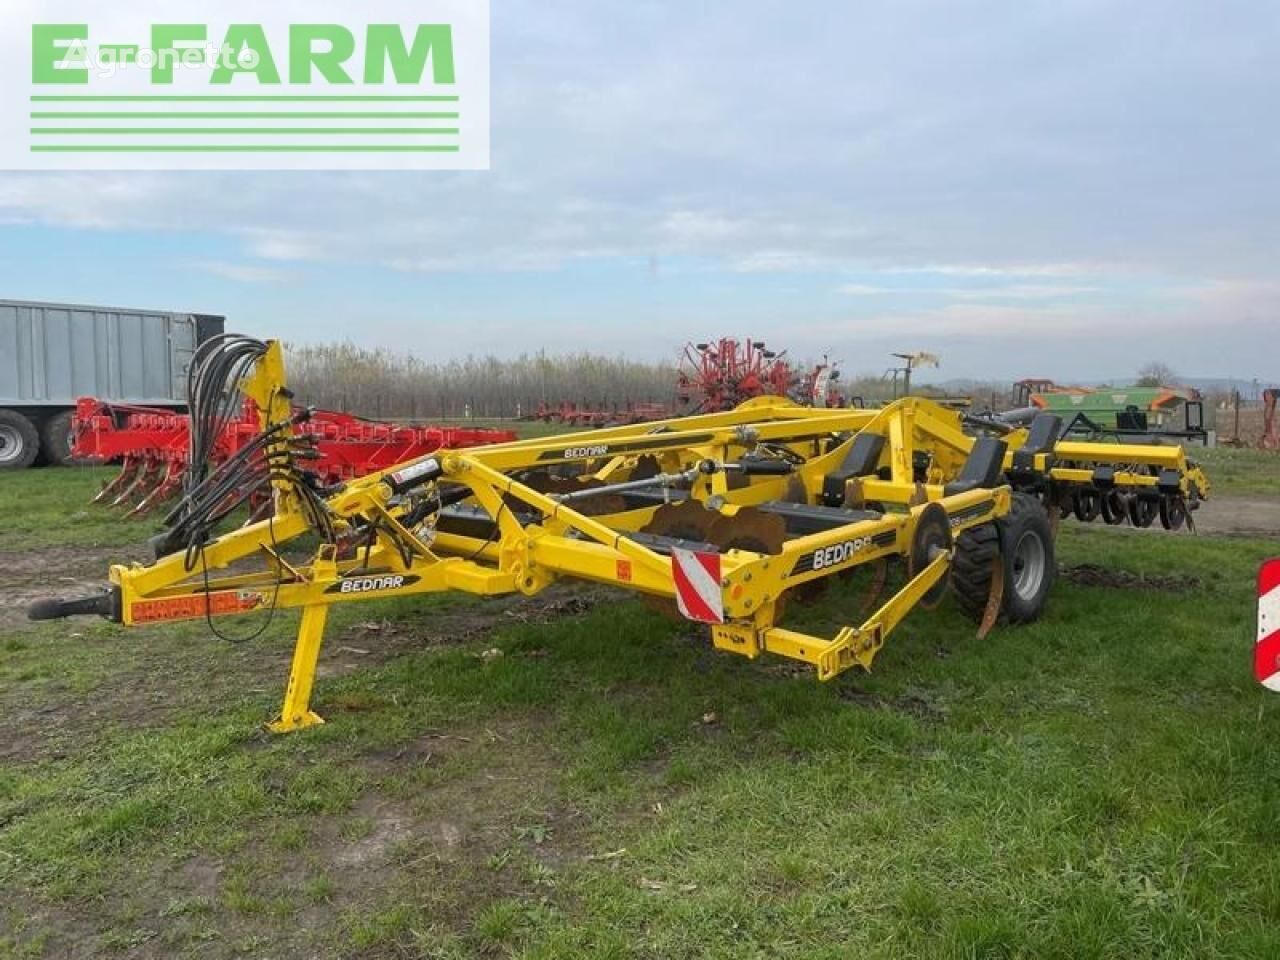 actros ro 4000r cultivator